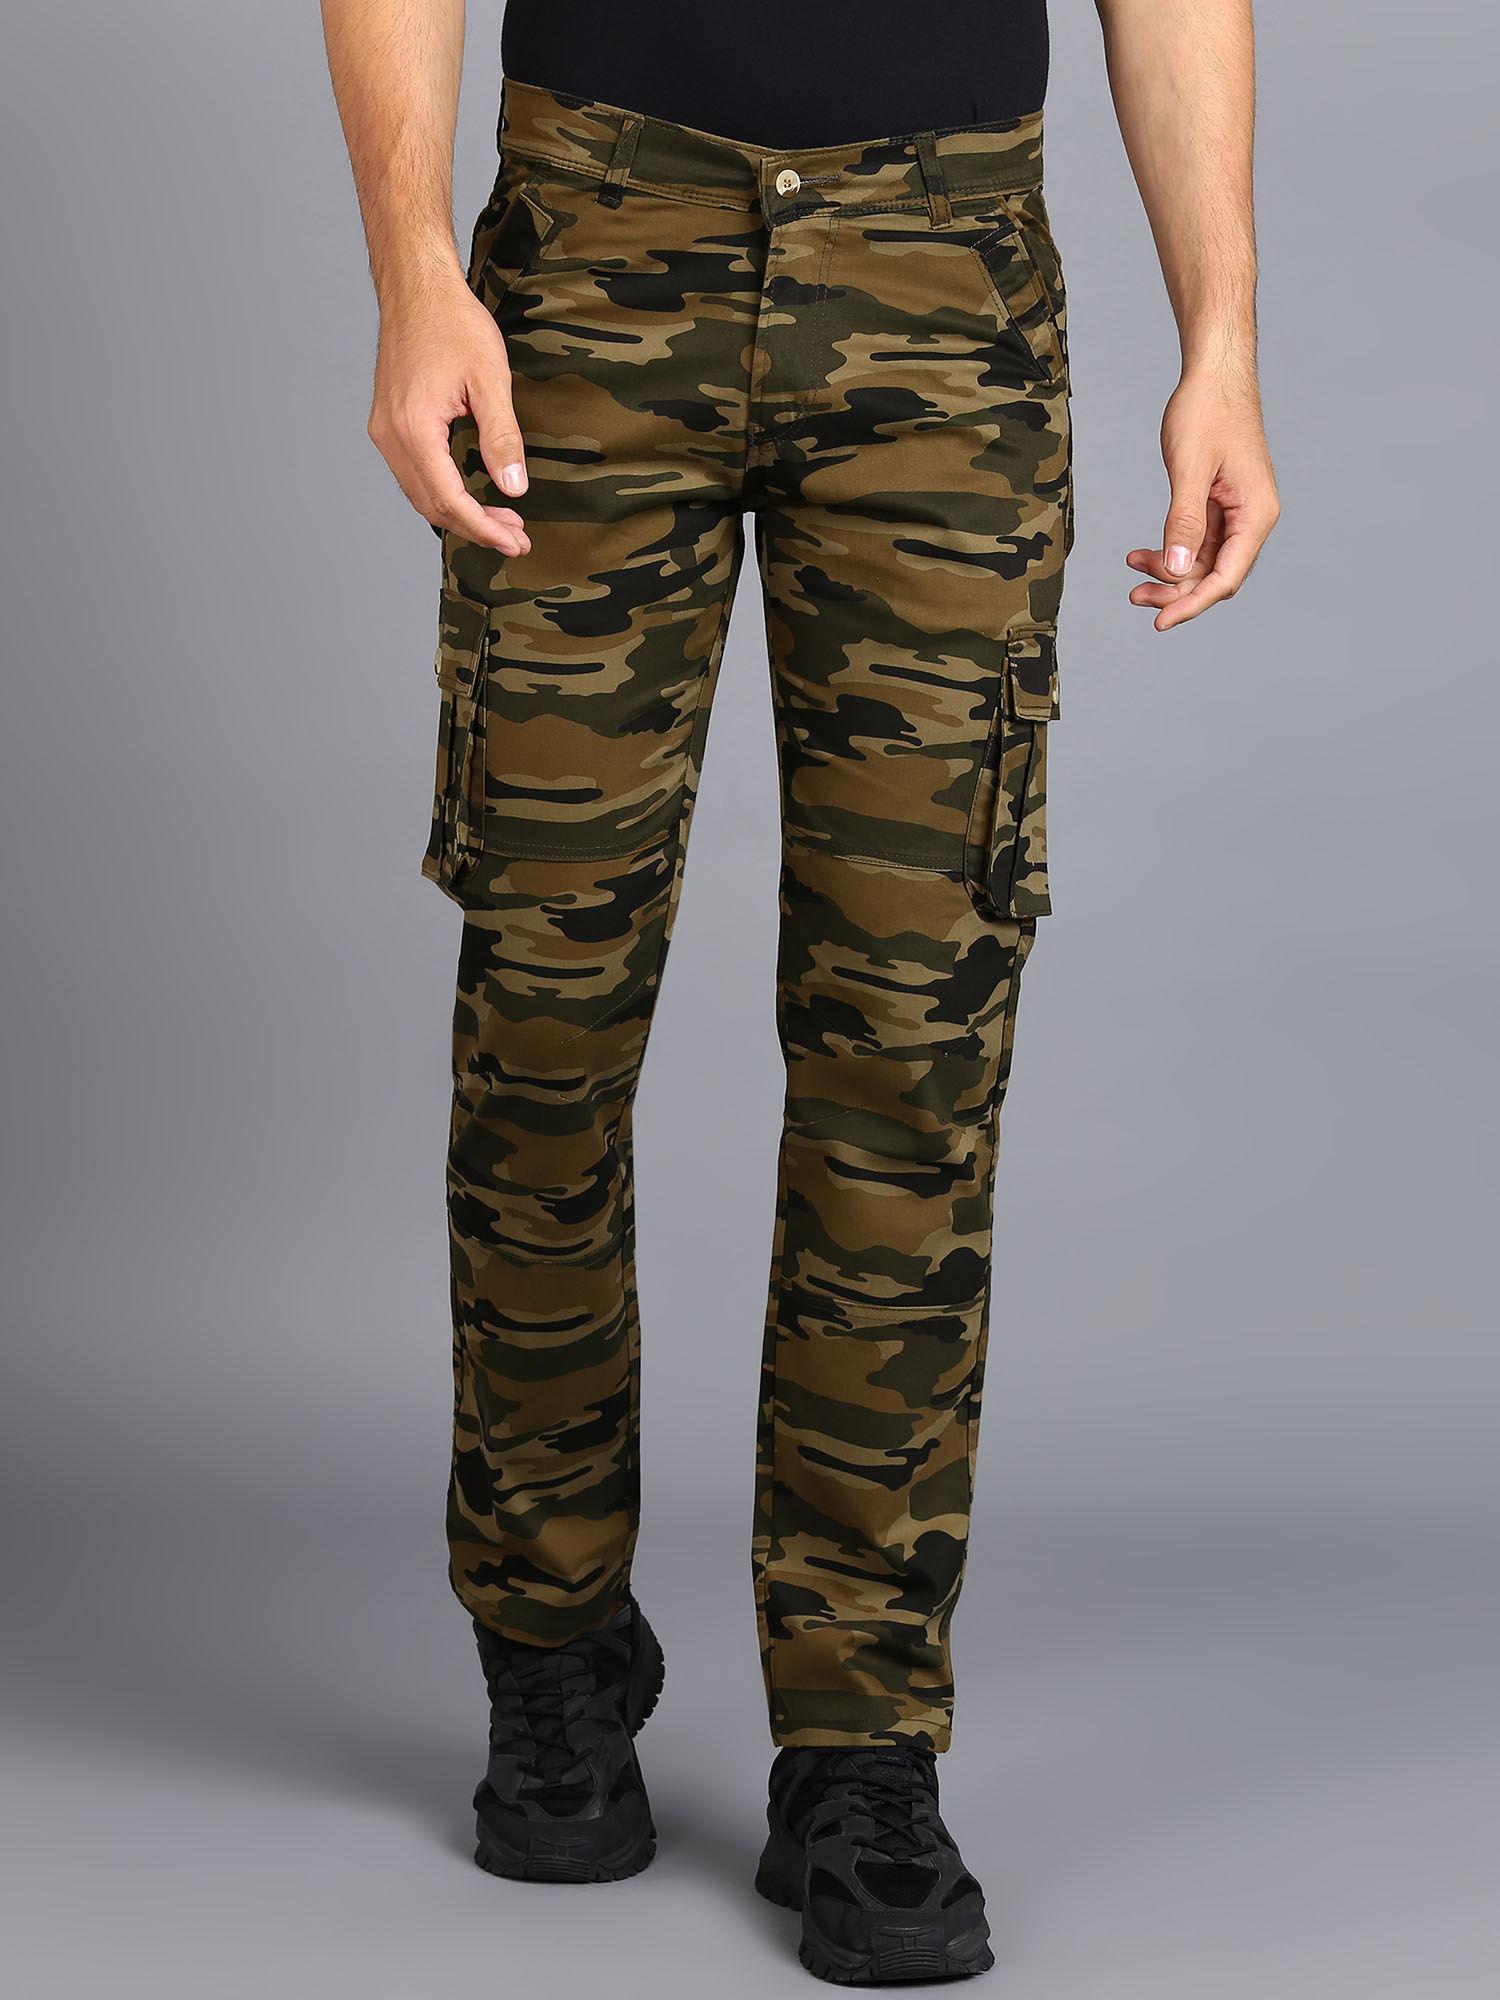 mens-green-regular-fit-military-camouflage-cargo-chino-pant